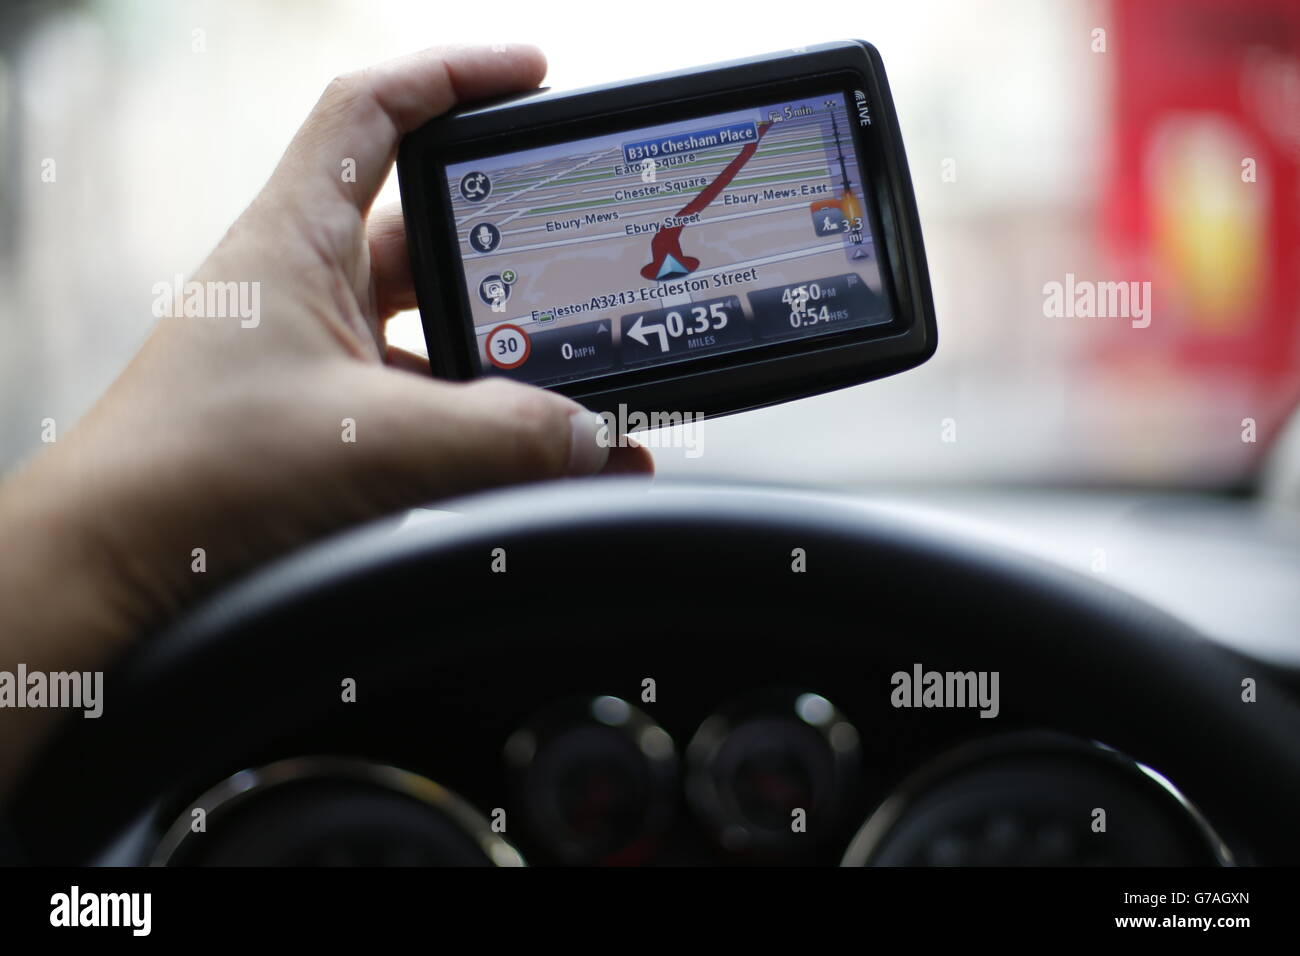 A man uses a satellite Navigator in his car. The sat nav system s a system of satellites that provide autonomous geo-spatial positioning with global coverage. It allows small electronic receivers to determine their location (longitude, latitude, and altitude ) to high precision (within a few metres) using time signals transmitted along a line of sight by radio from satellites. Stock Photo